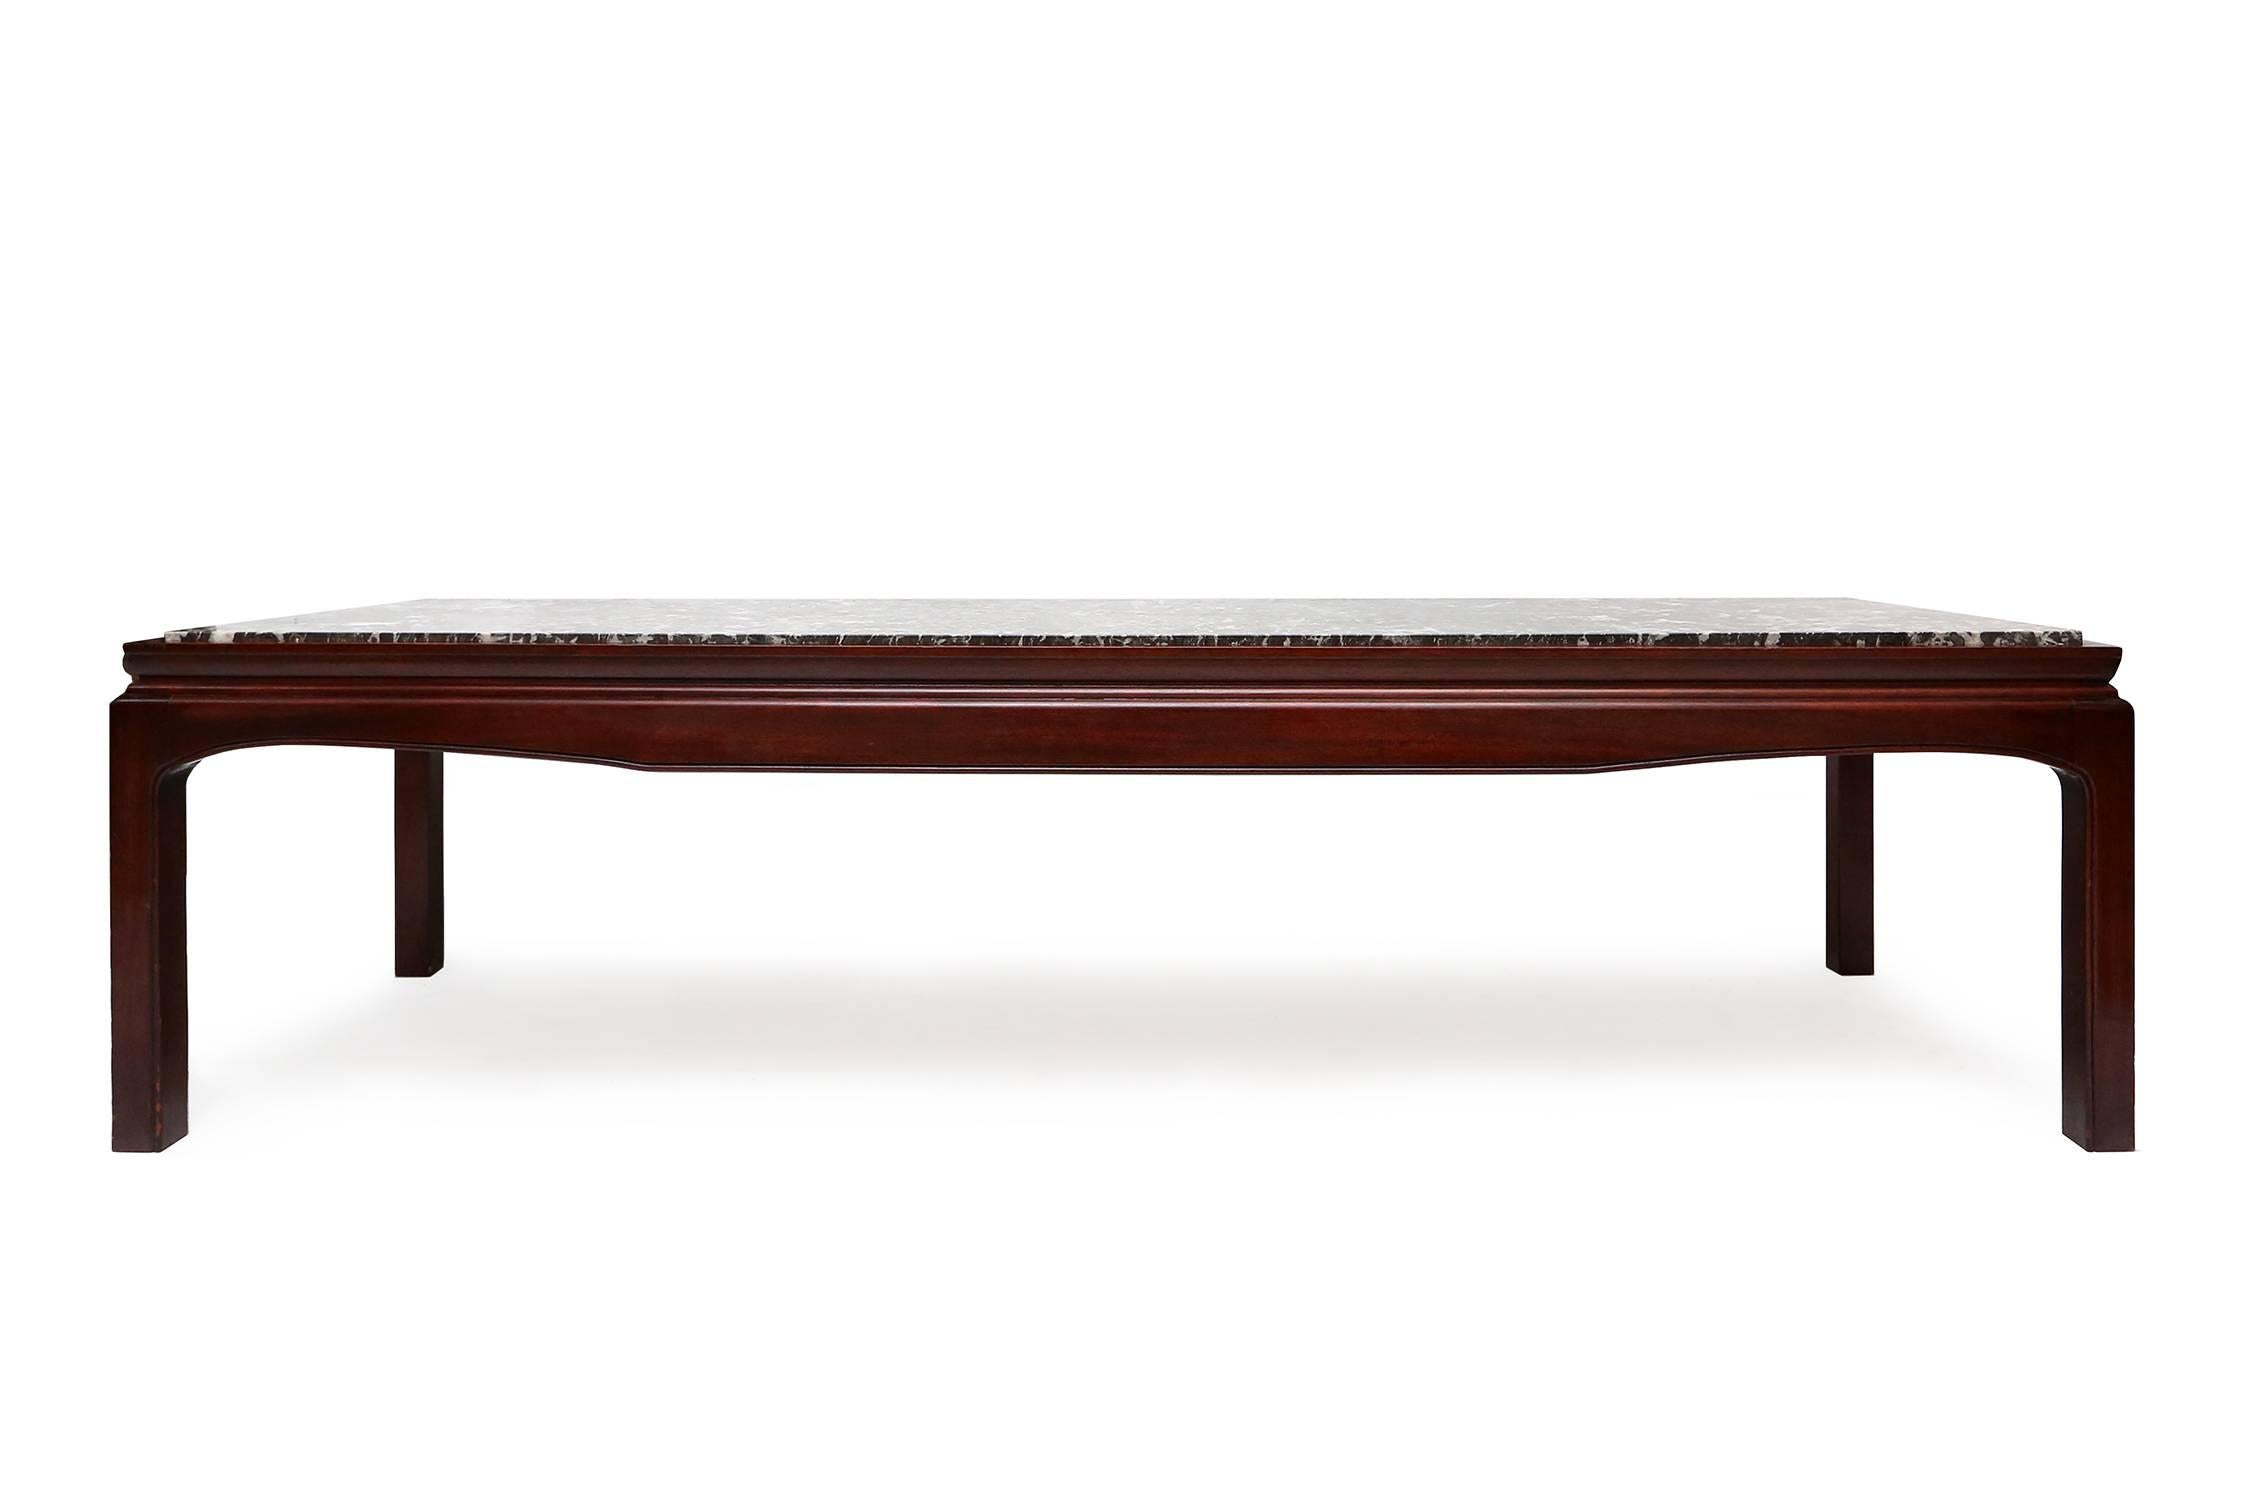 Mahogany and marble coffee table by De Coene in Japanoiserie style, 

Belgium, circa 1950.

Measures: L 200 cm, H 50 cm, D 65 cm.